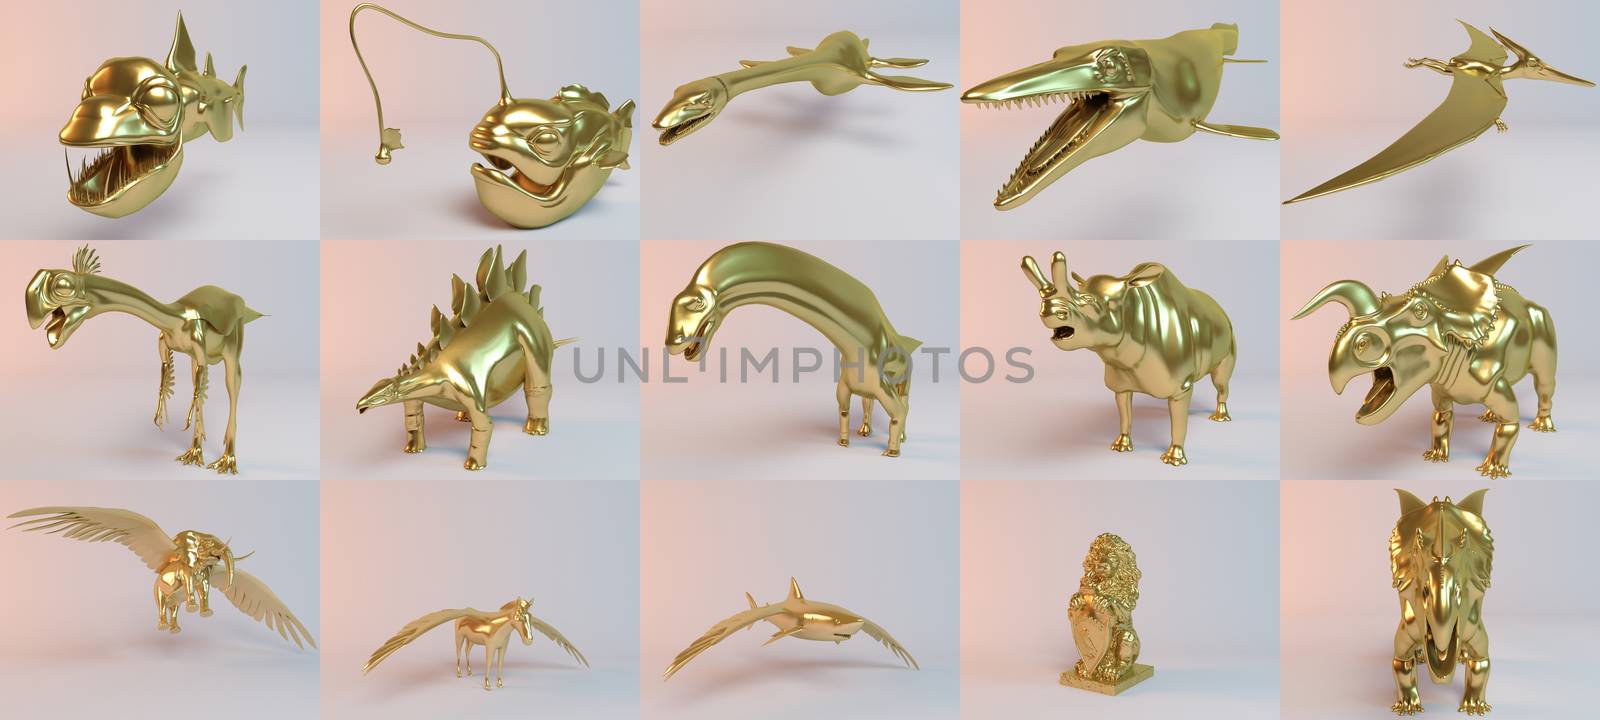 golden 3D animals collection part two by fares139